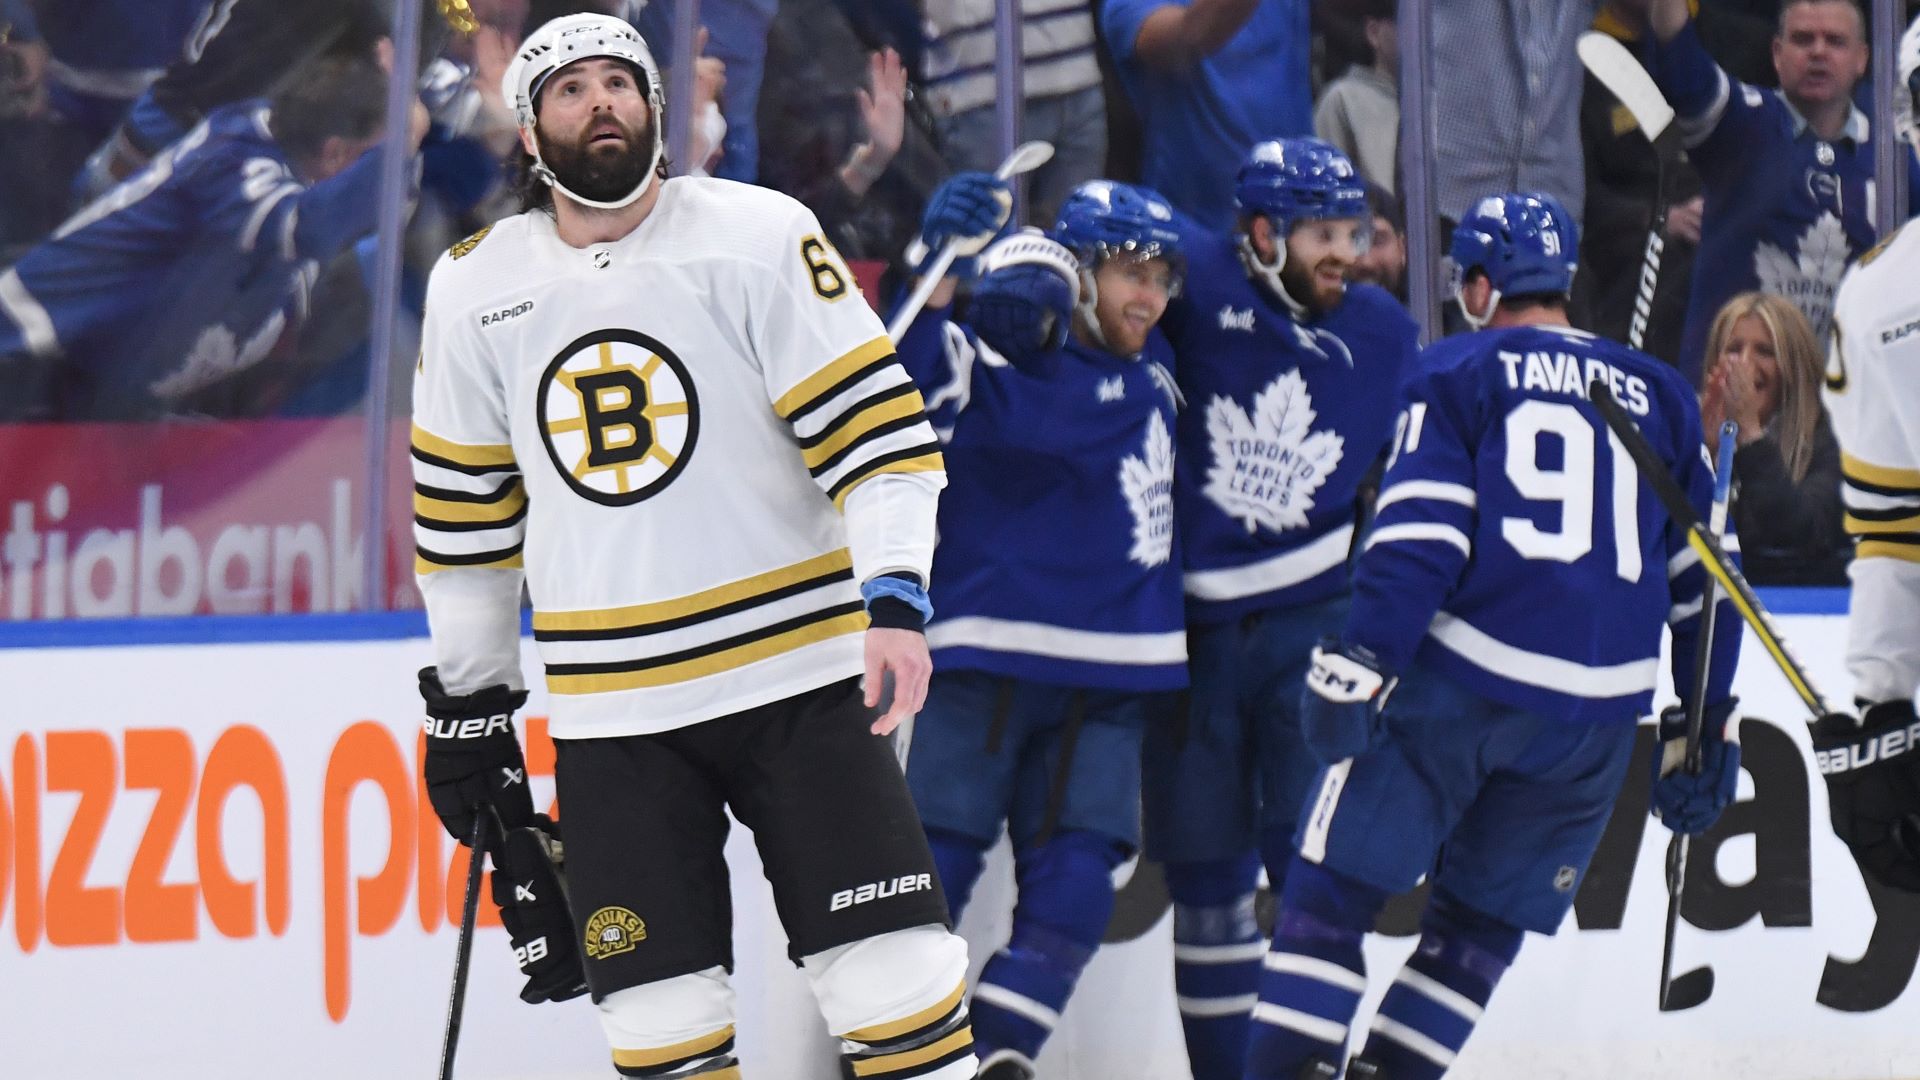 Pat Maroon Reveals Free Agency Preference After Bruins Playoff Run